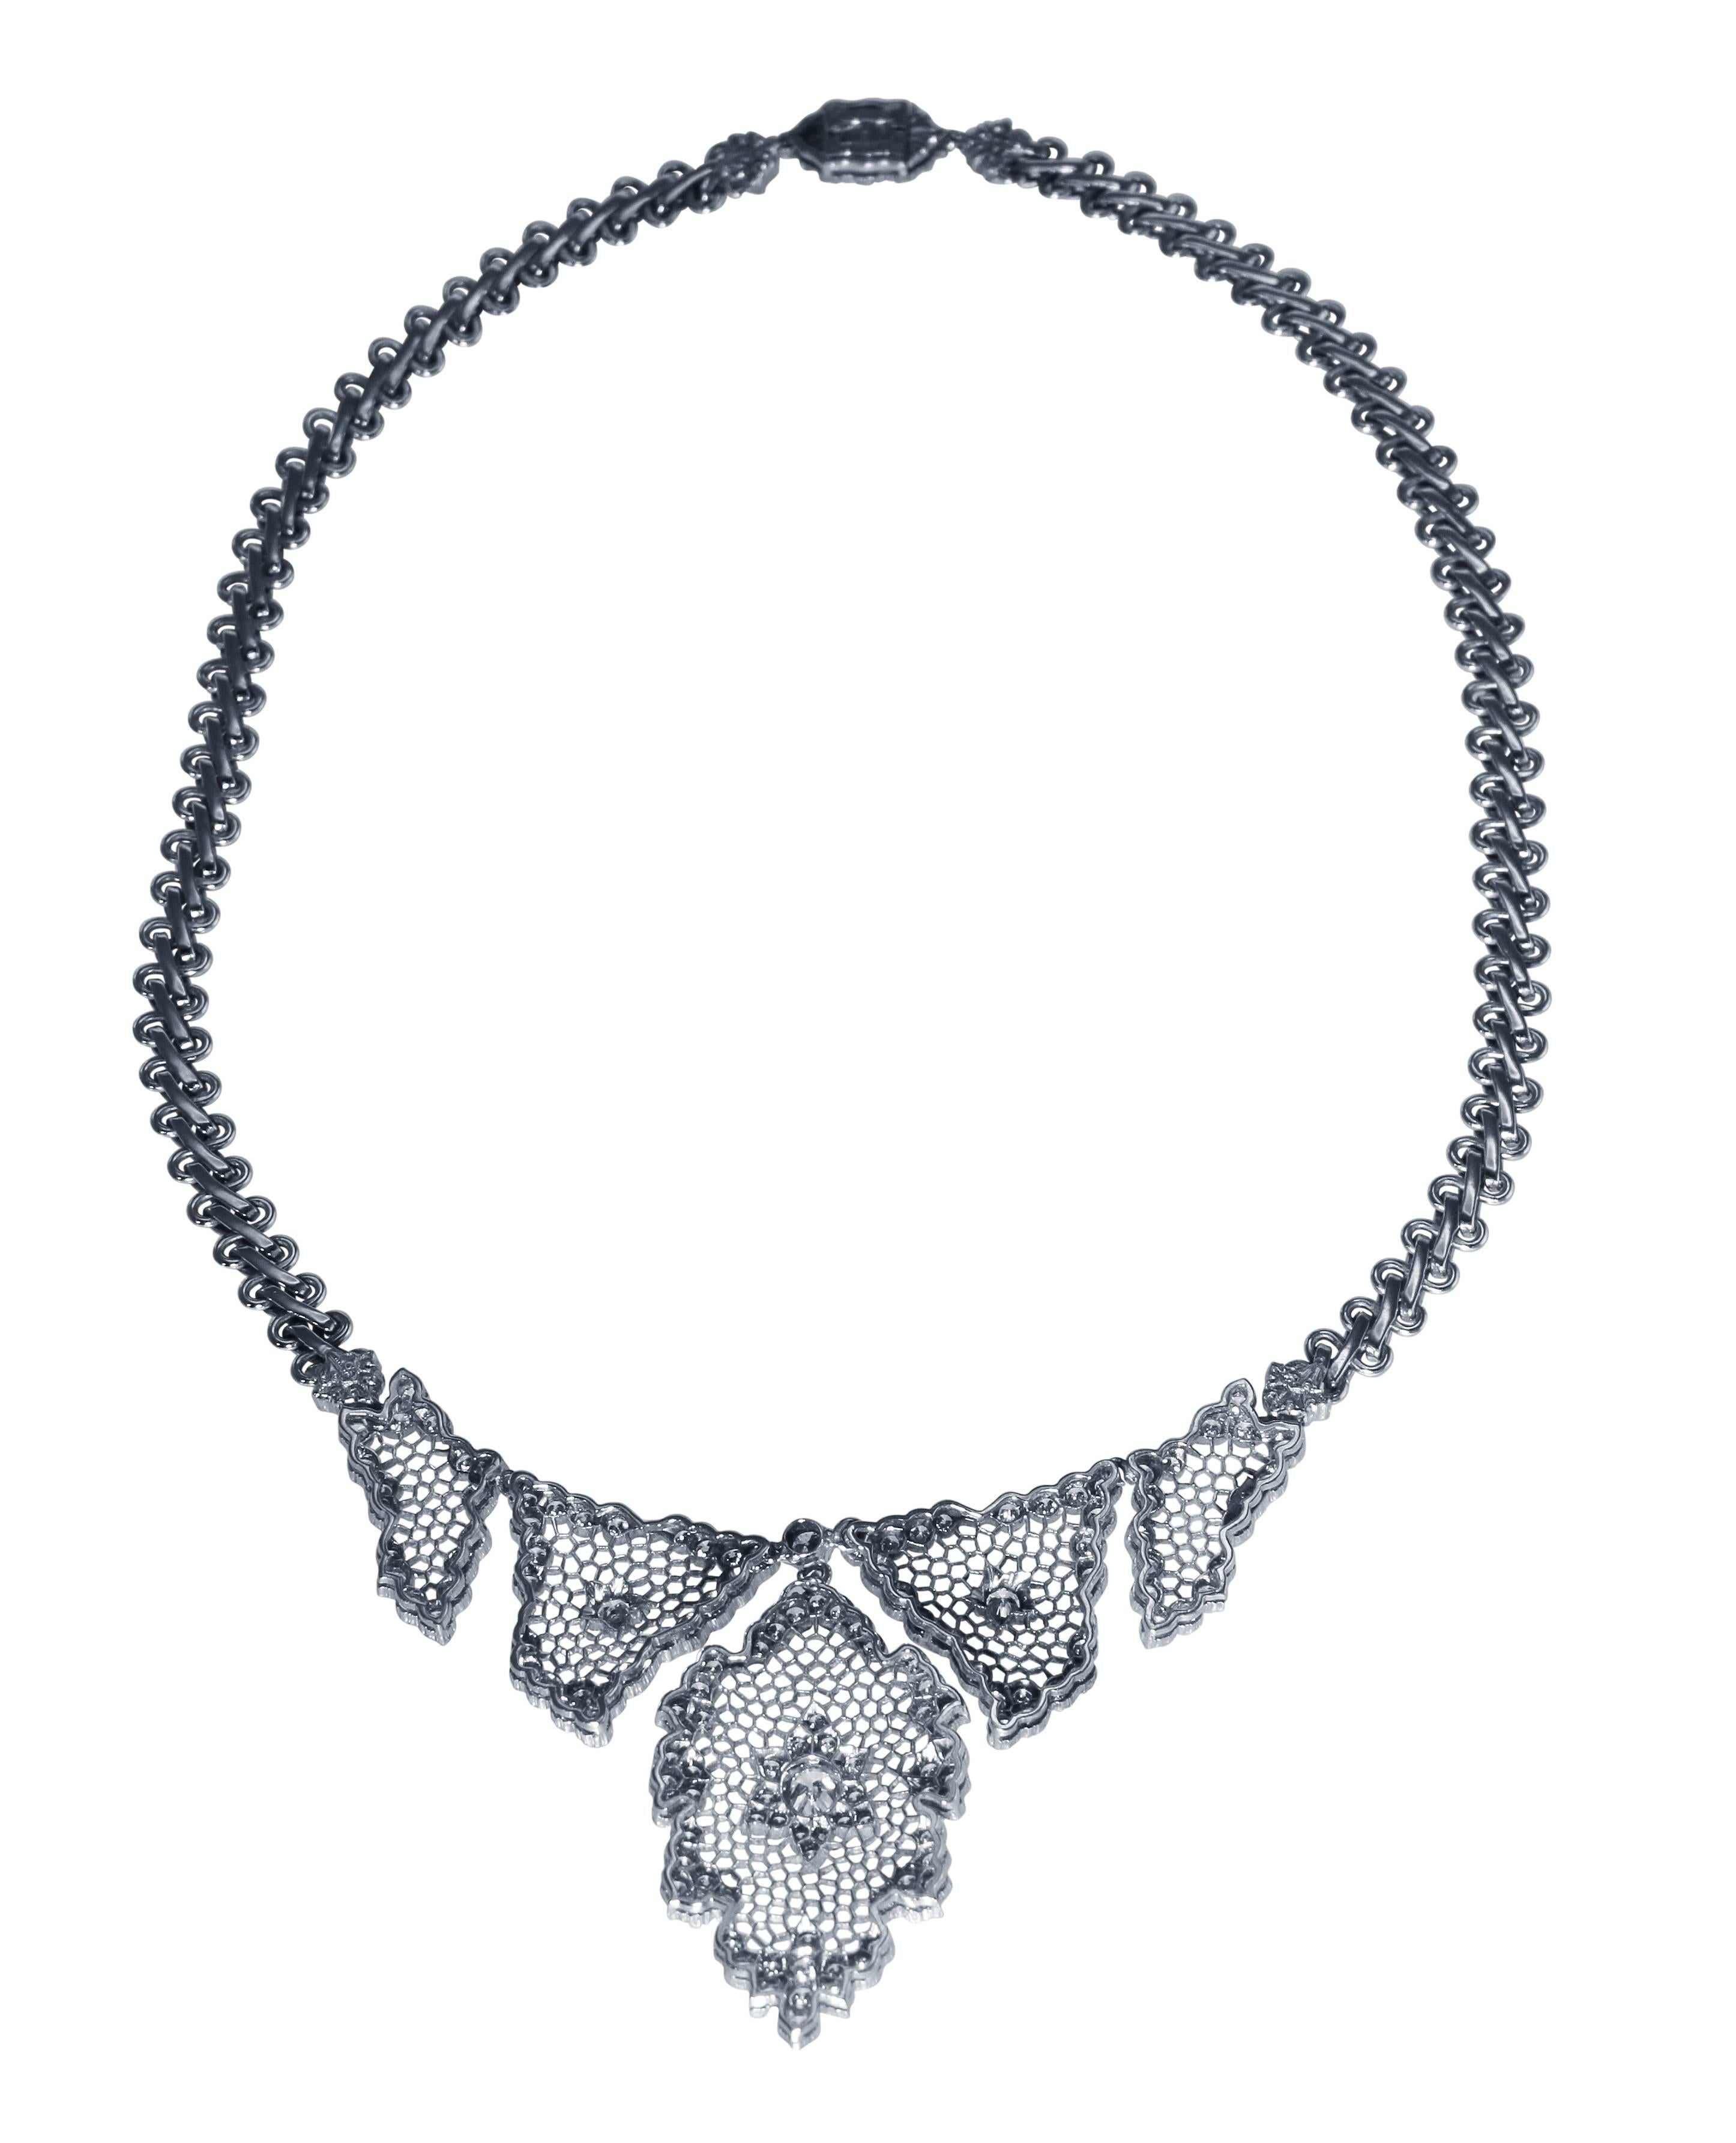 18 Karat White Gold and Diamond "Tulle" Necklace by Buccellati, Italy

• Signed Gianmaria Buccellati, Italy 18K
• French assay marks 
• 148 diamonds weighing 5.33 carats
• Length 15 1/2 inches
• Gross weight 46.2 grams
• Buccellati